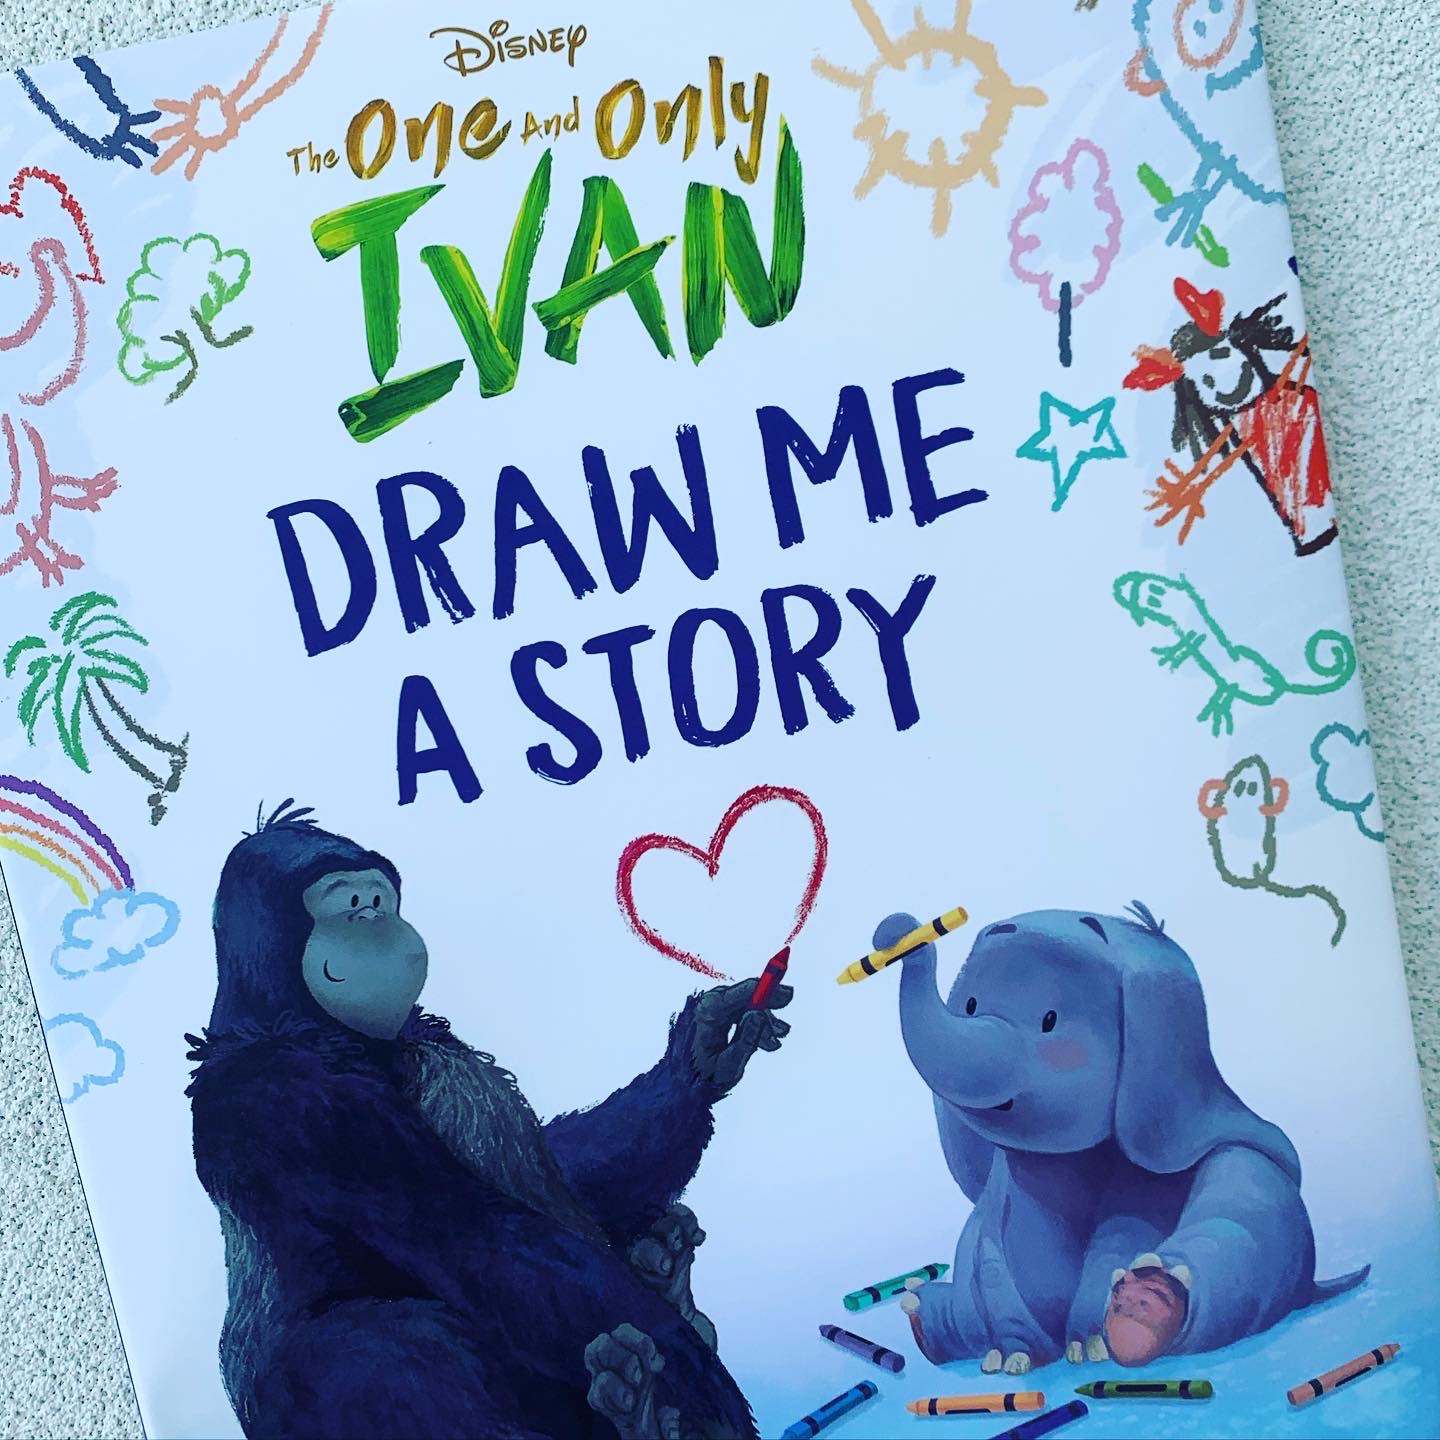 picturing-disney-the-one-and-only-ivan-draw-me-a-story